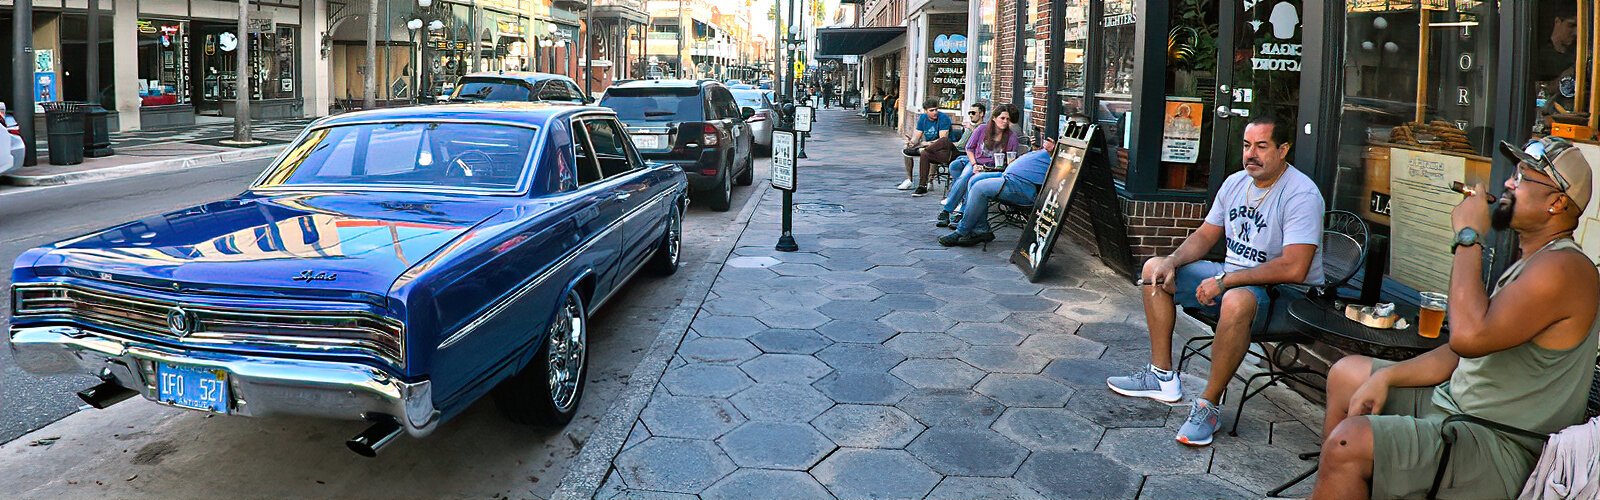  A cigar lover relaxes with another aficionado outside La Faraona Cigar Lounge while keeping an eye on his immaculate 1965 Buick Skylark antique car.